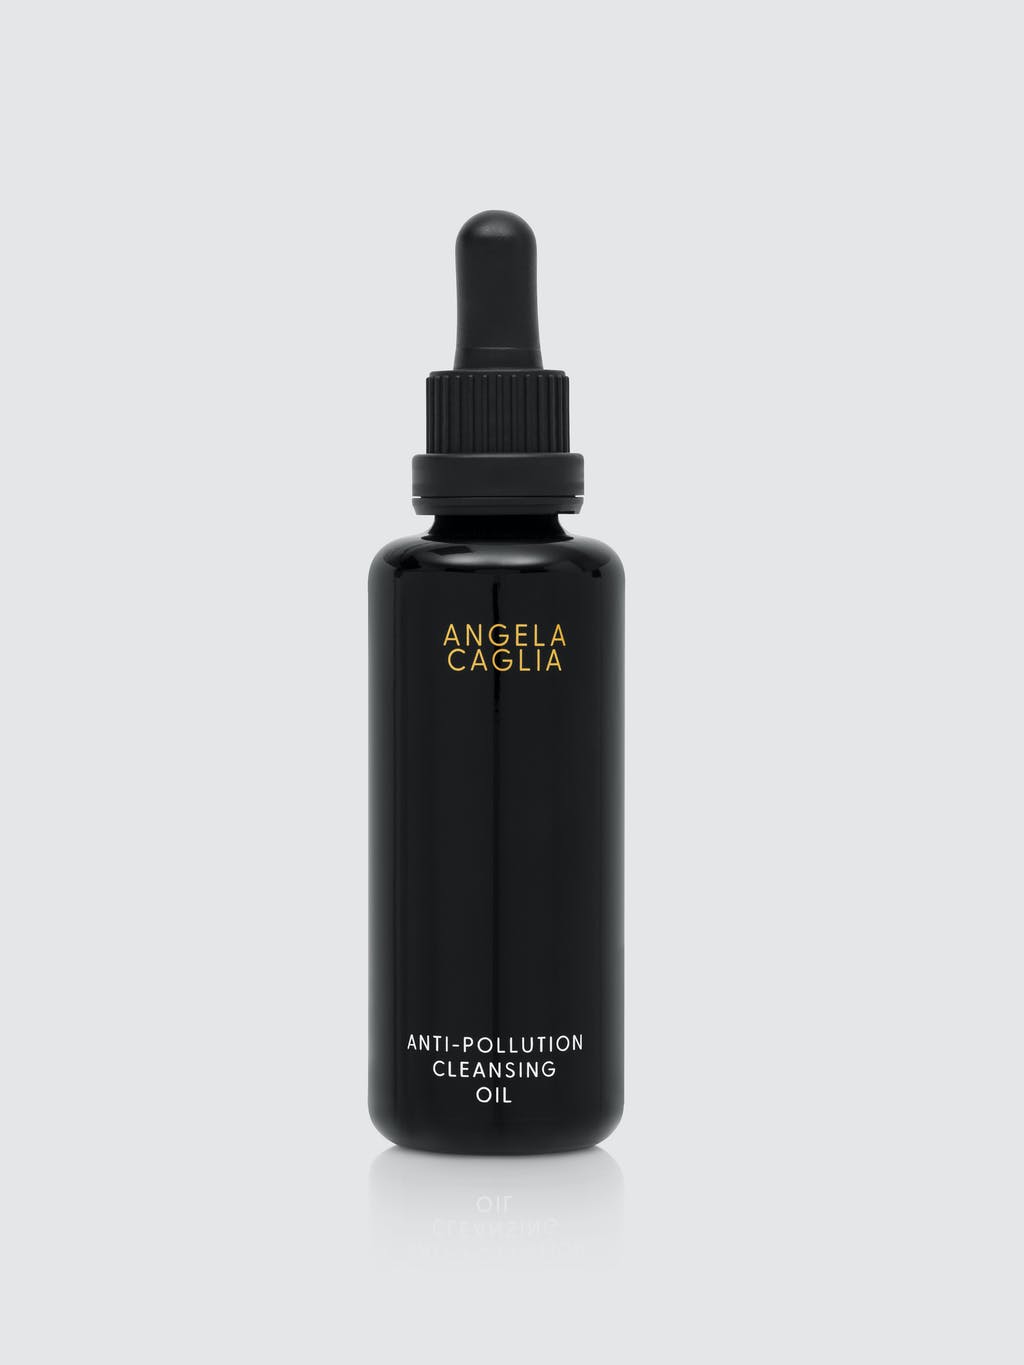 Angela Caglia® Anti-Pollution Cleansing Oil